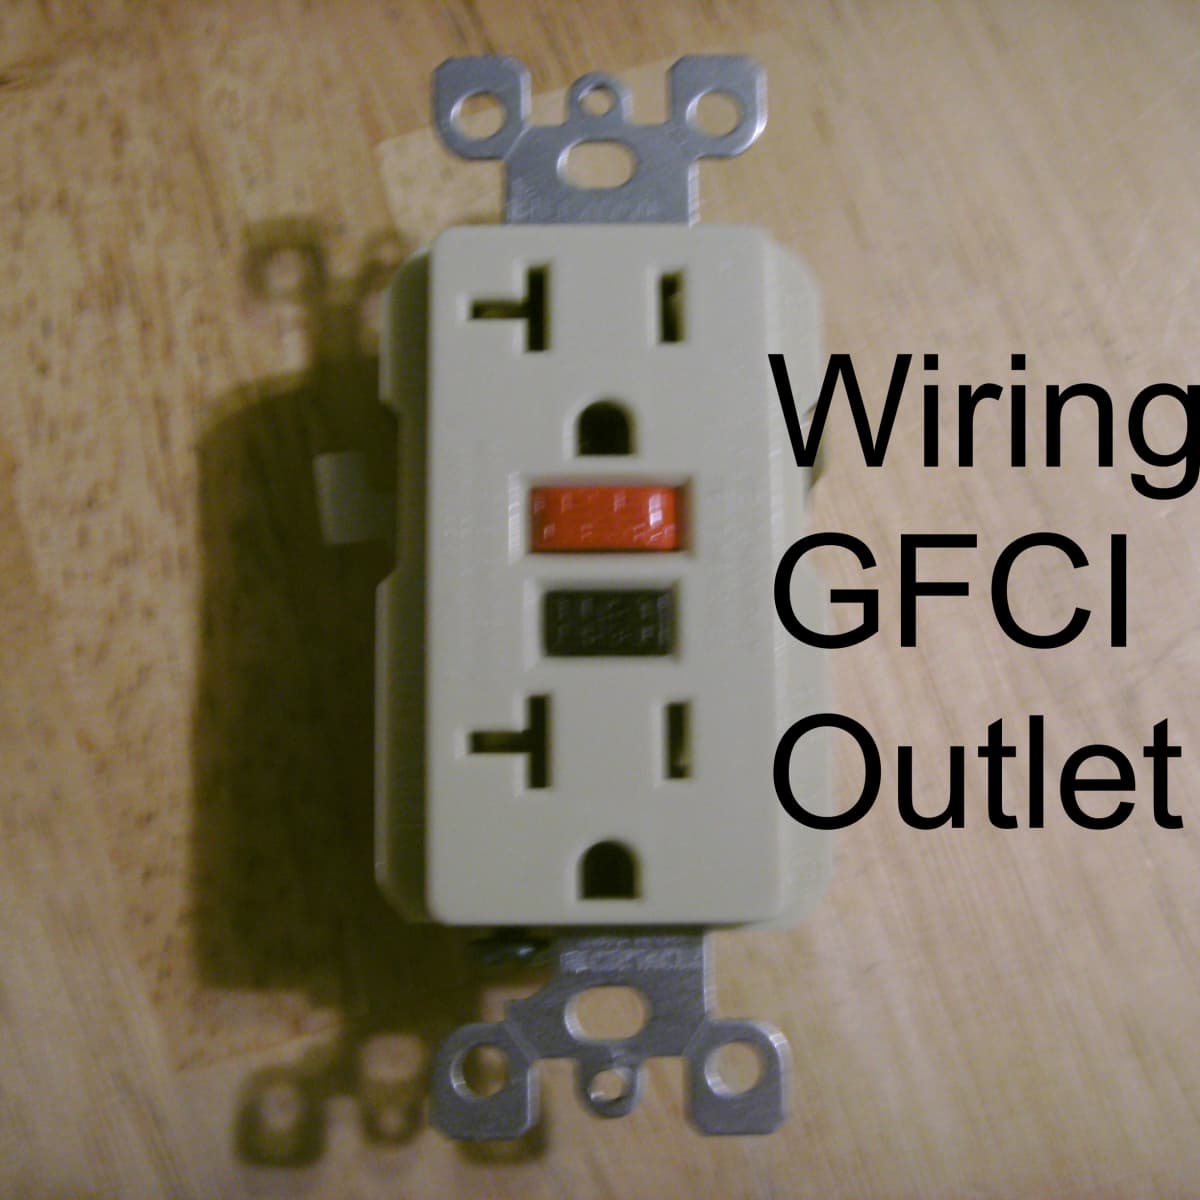 how to install a gfci outlet dyi gfci wiring made easy